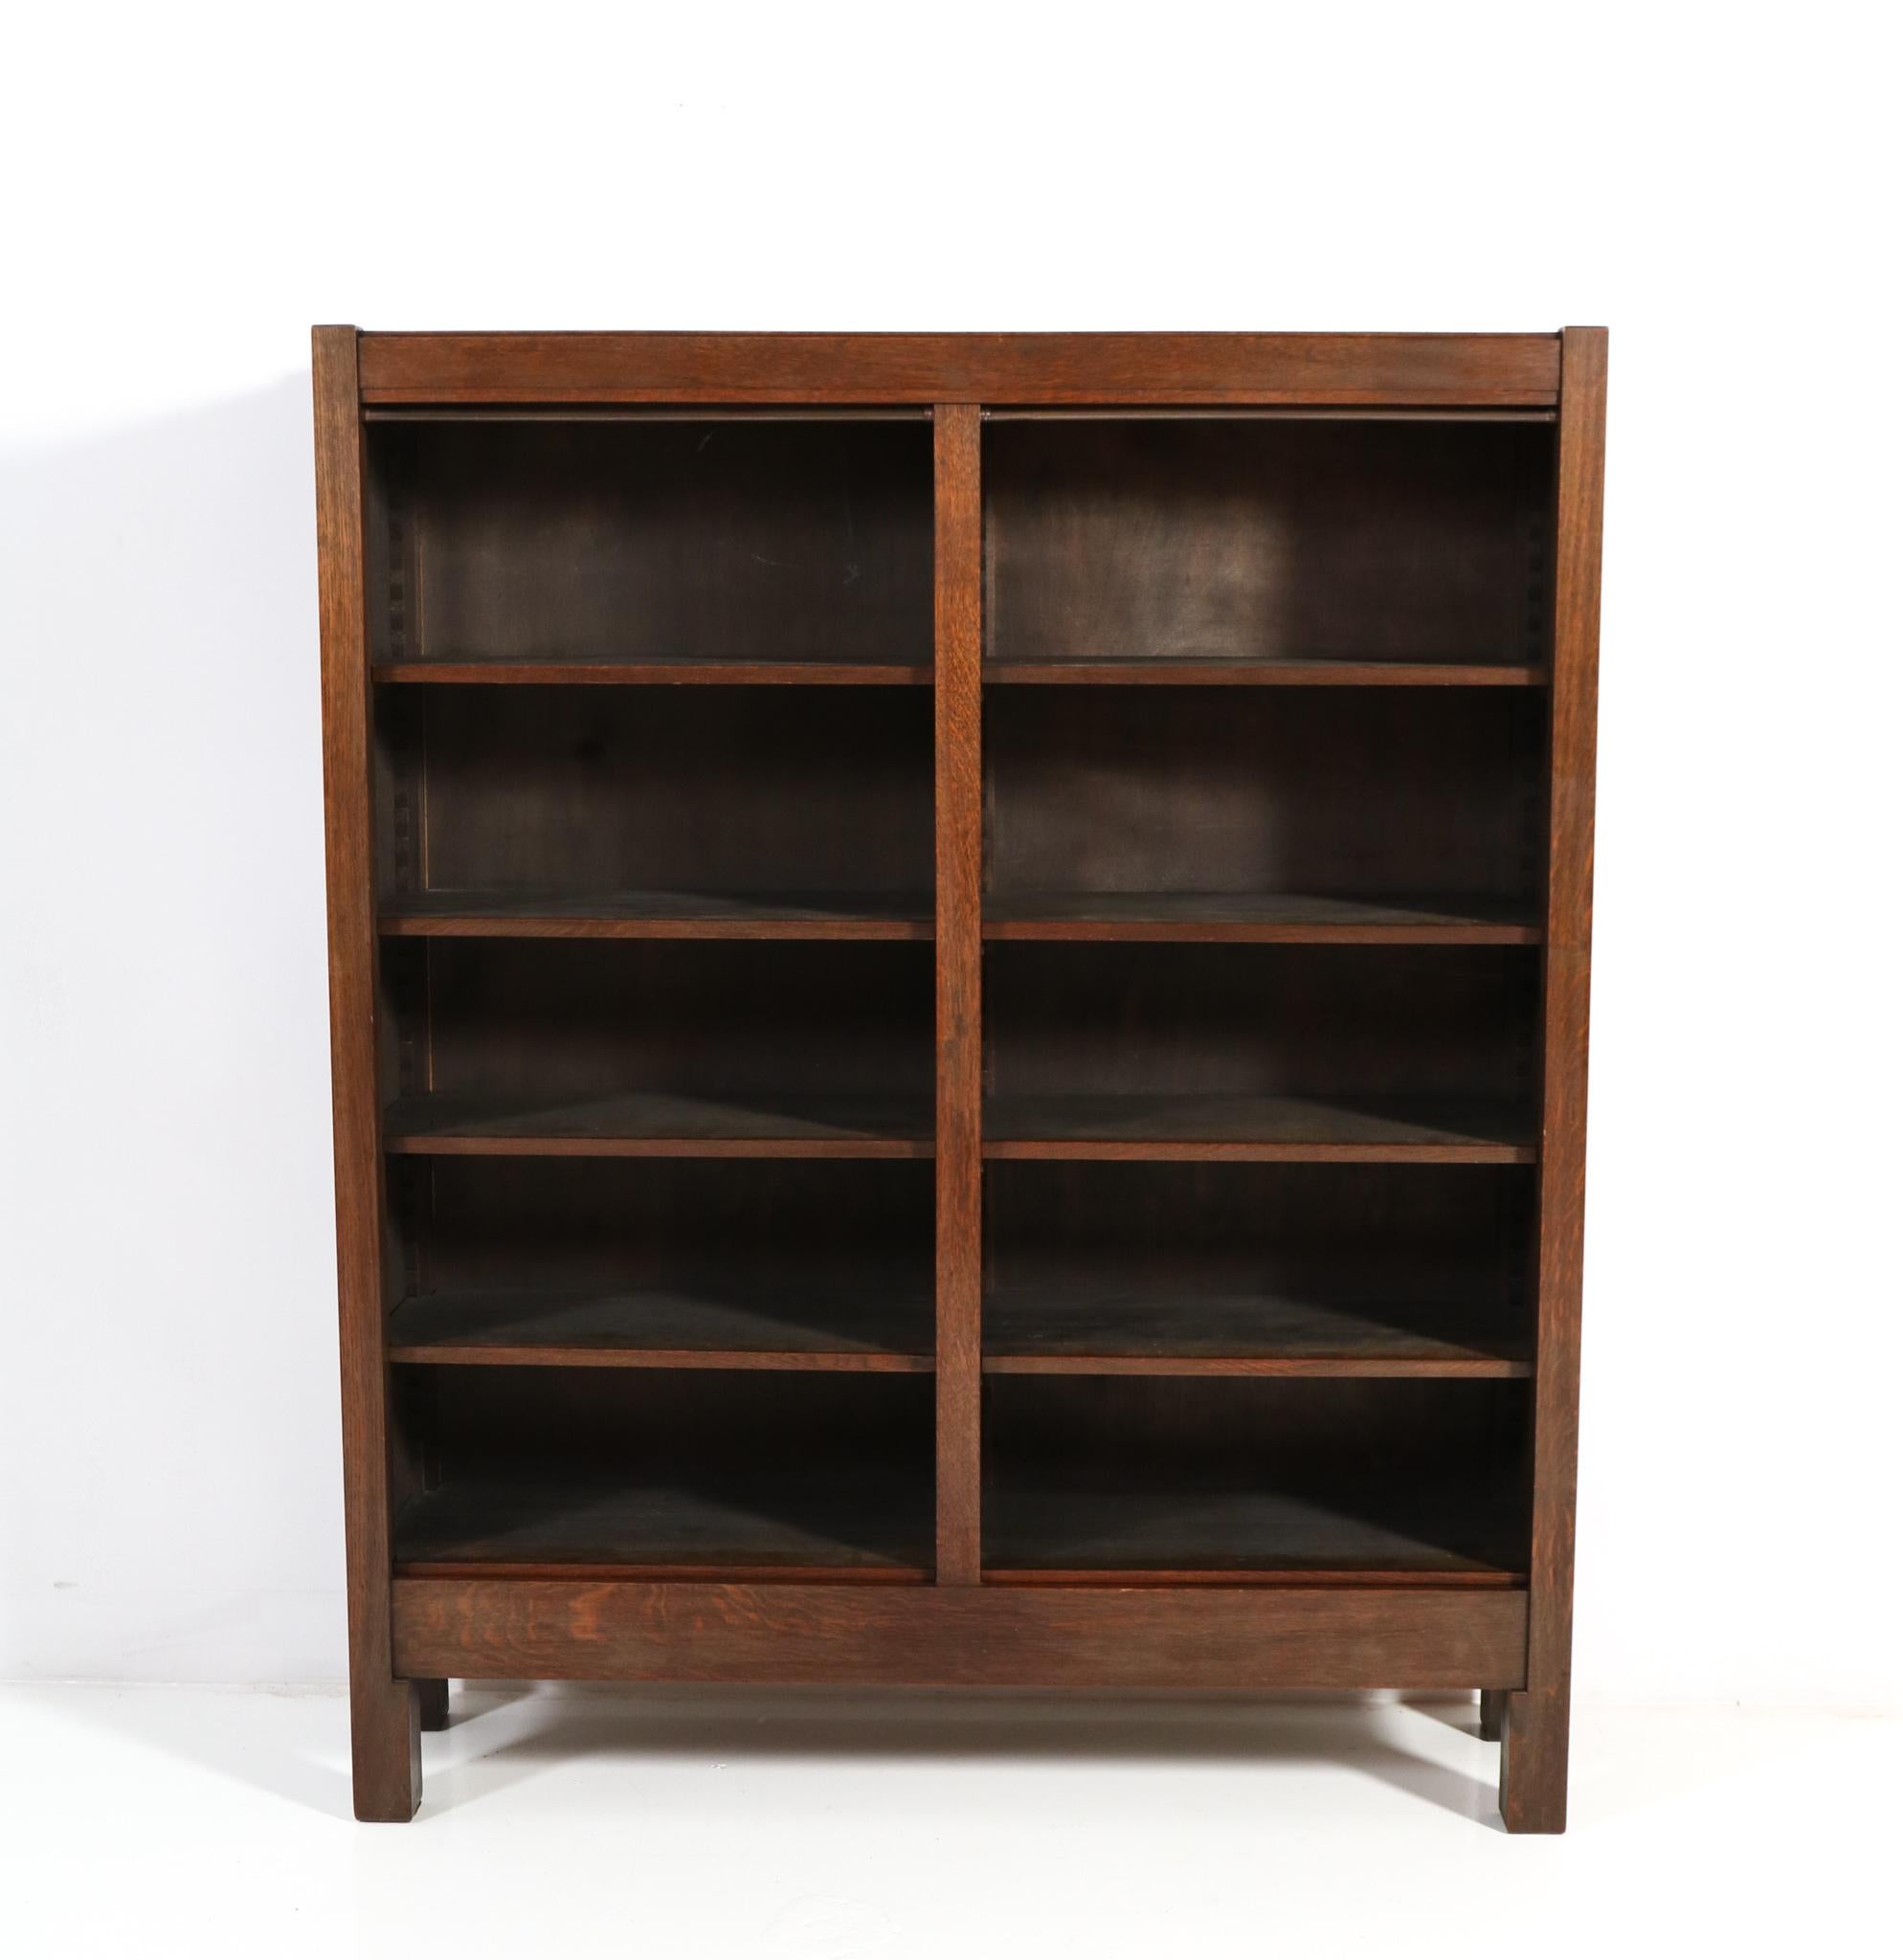 Magnificent and rare Art Deco Modernist open bookcase.
Design by Frits Spanjaard for L.O.V. Oosterbeek.
Striking Dutch design from the 1920s.
Solid oak with eight original wooden shelves,adjustable in height.
Marked with original manufacturers